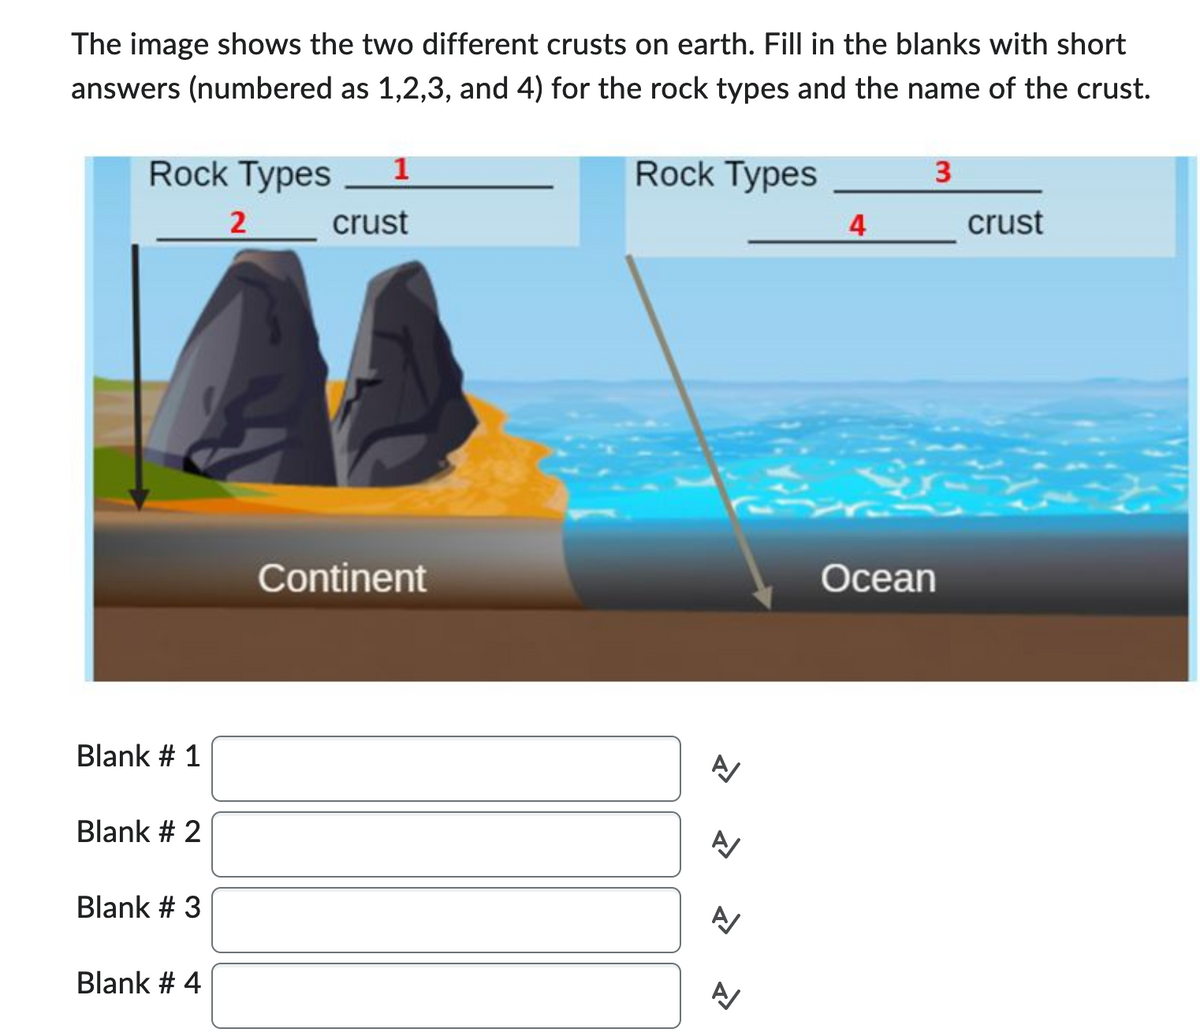 The image shows the two different crusts on earth. Fill in the blanks with short
answers (numbered as 1,2,3, and 4) for the rock types and the name of the crust.
Rock Types
Rock Types 1
2
crust
Blank # 1
Blank # 2
Blank # 3
Blank # 4
Continent
A
N
A
신
4
Ocean
3
crust